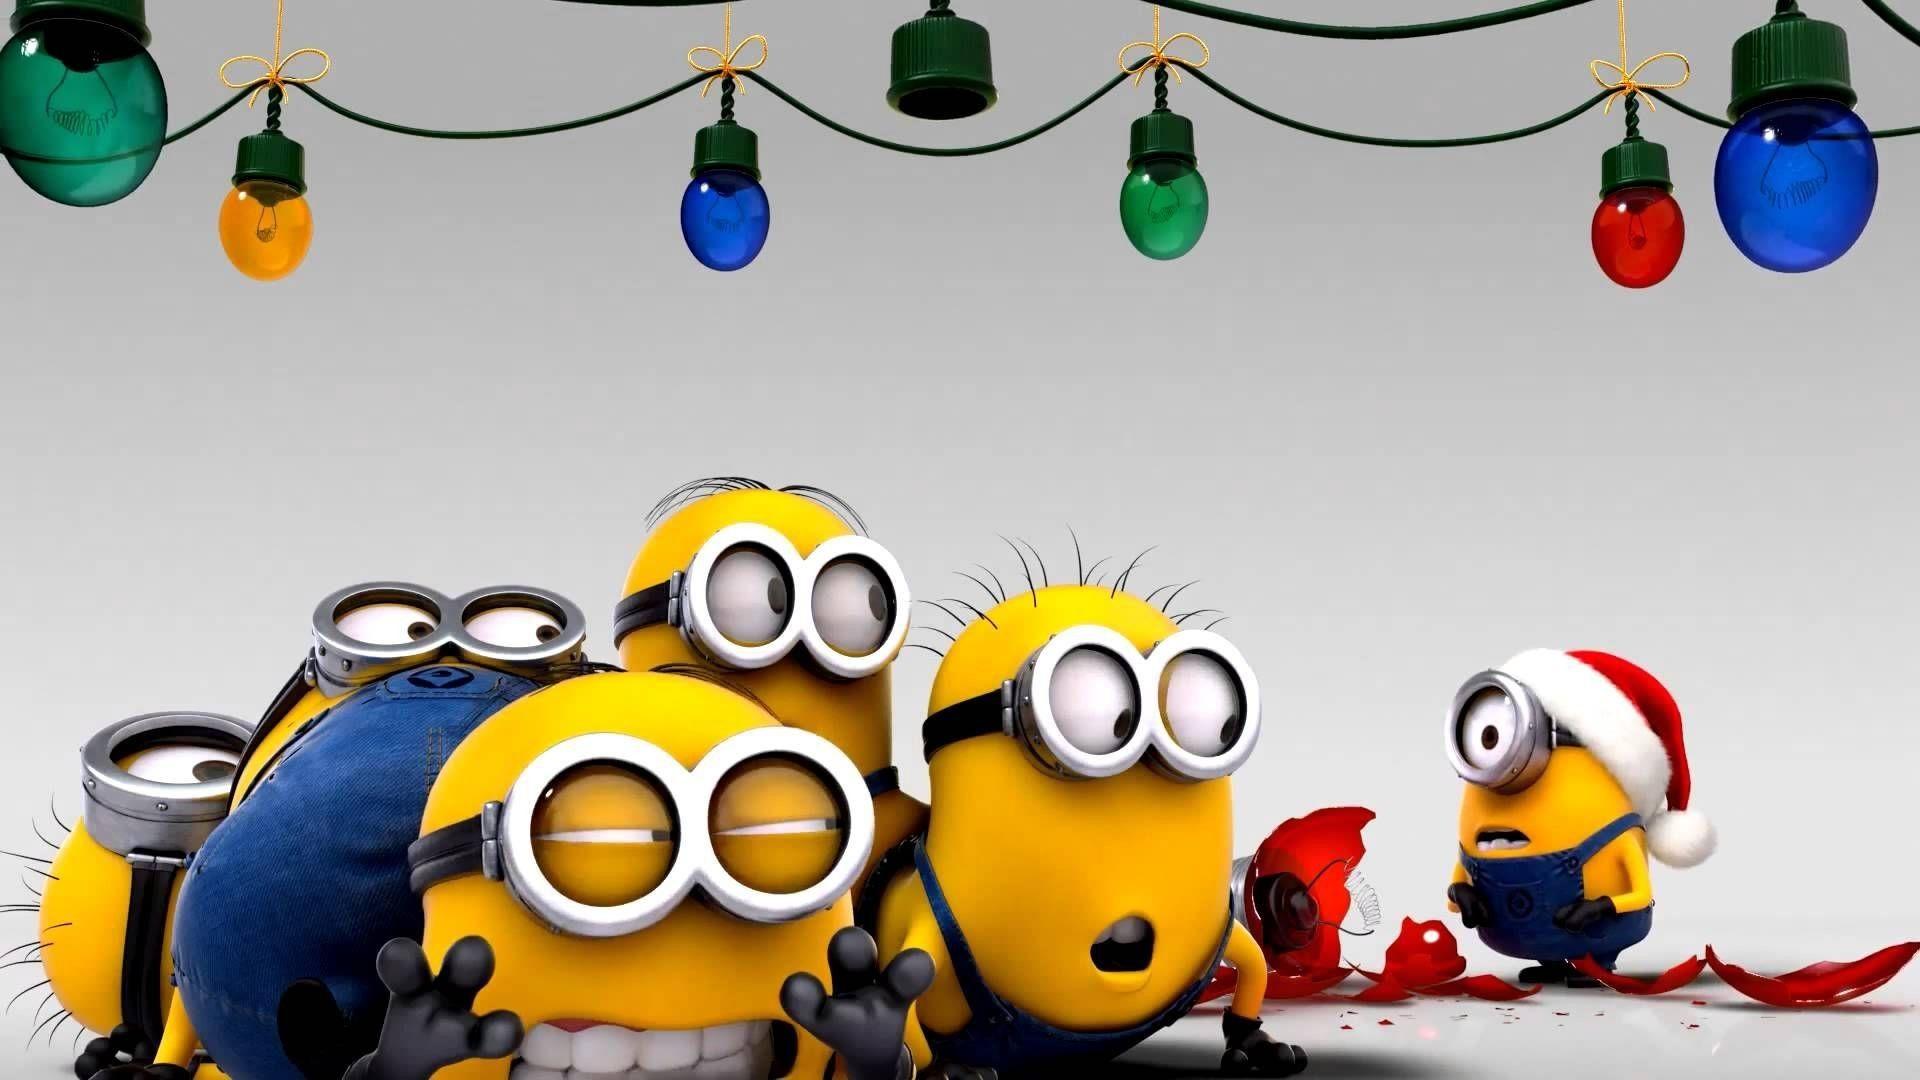 Minions Christmas wallpaper by bluecoral74  Download on ZEDGE  690f